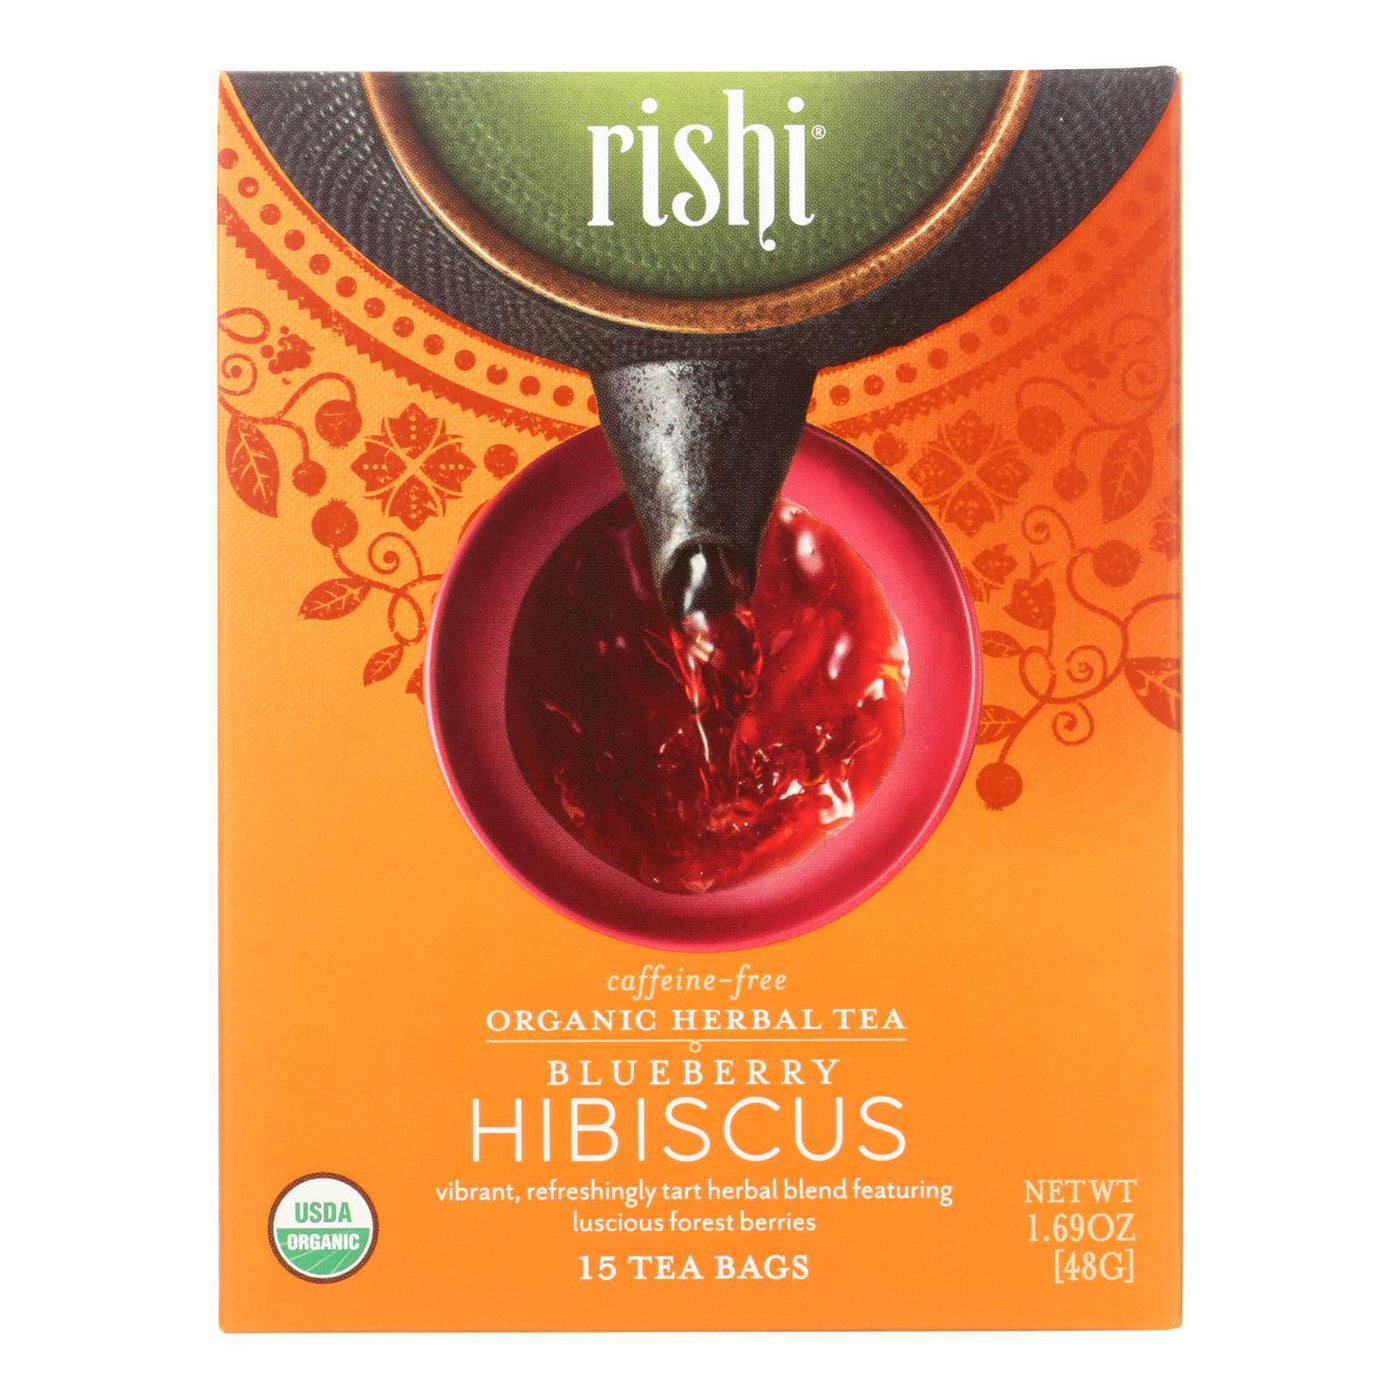 Buy Rishi Organic Tea - Blueberry Hibiscus - Case Of 6 - 15 Bags  at OnlyNaturals.us